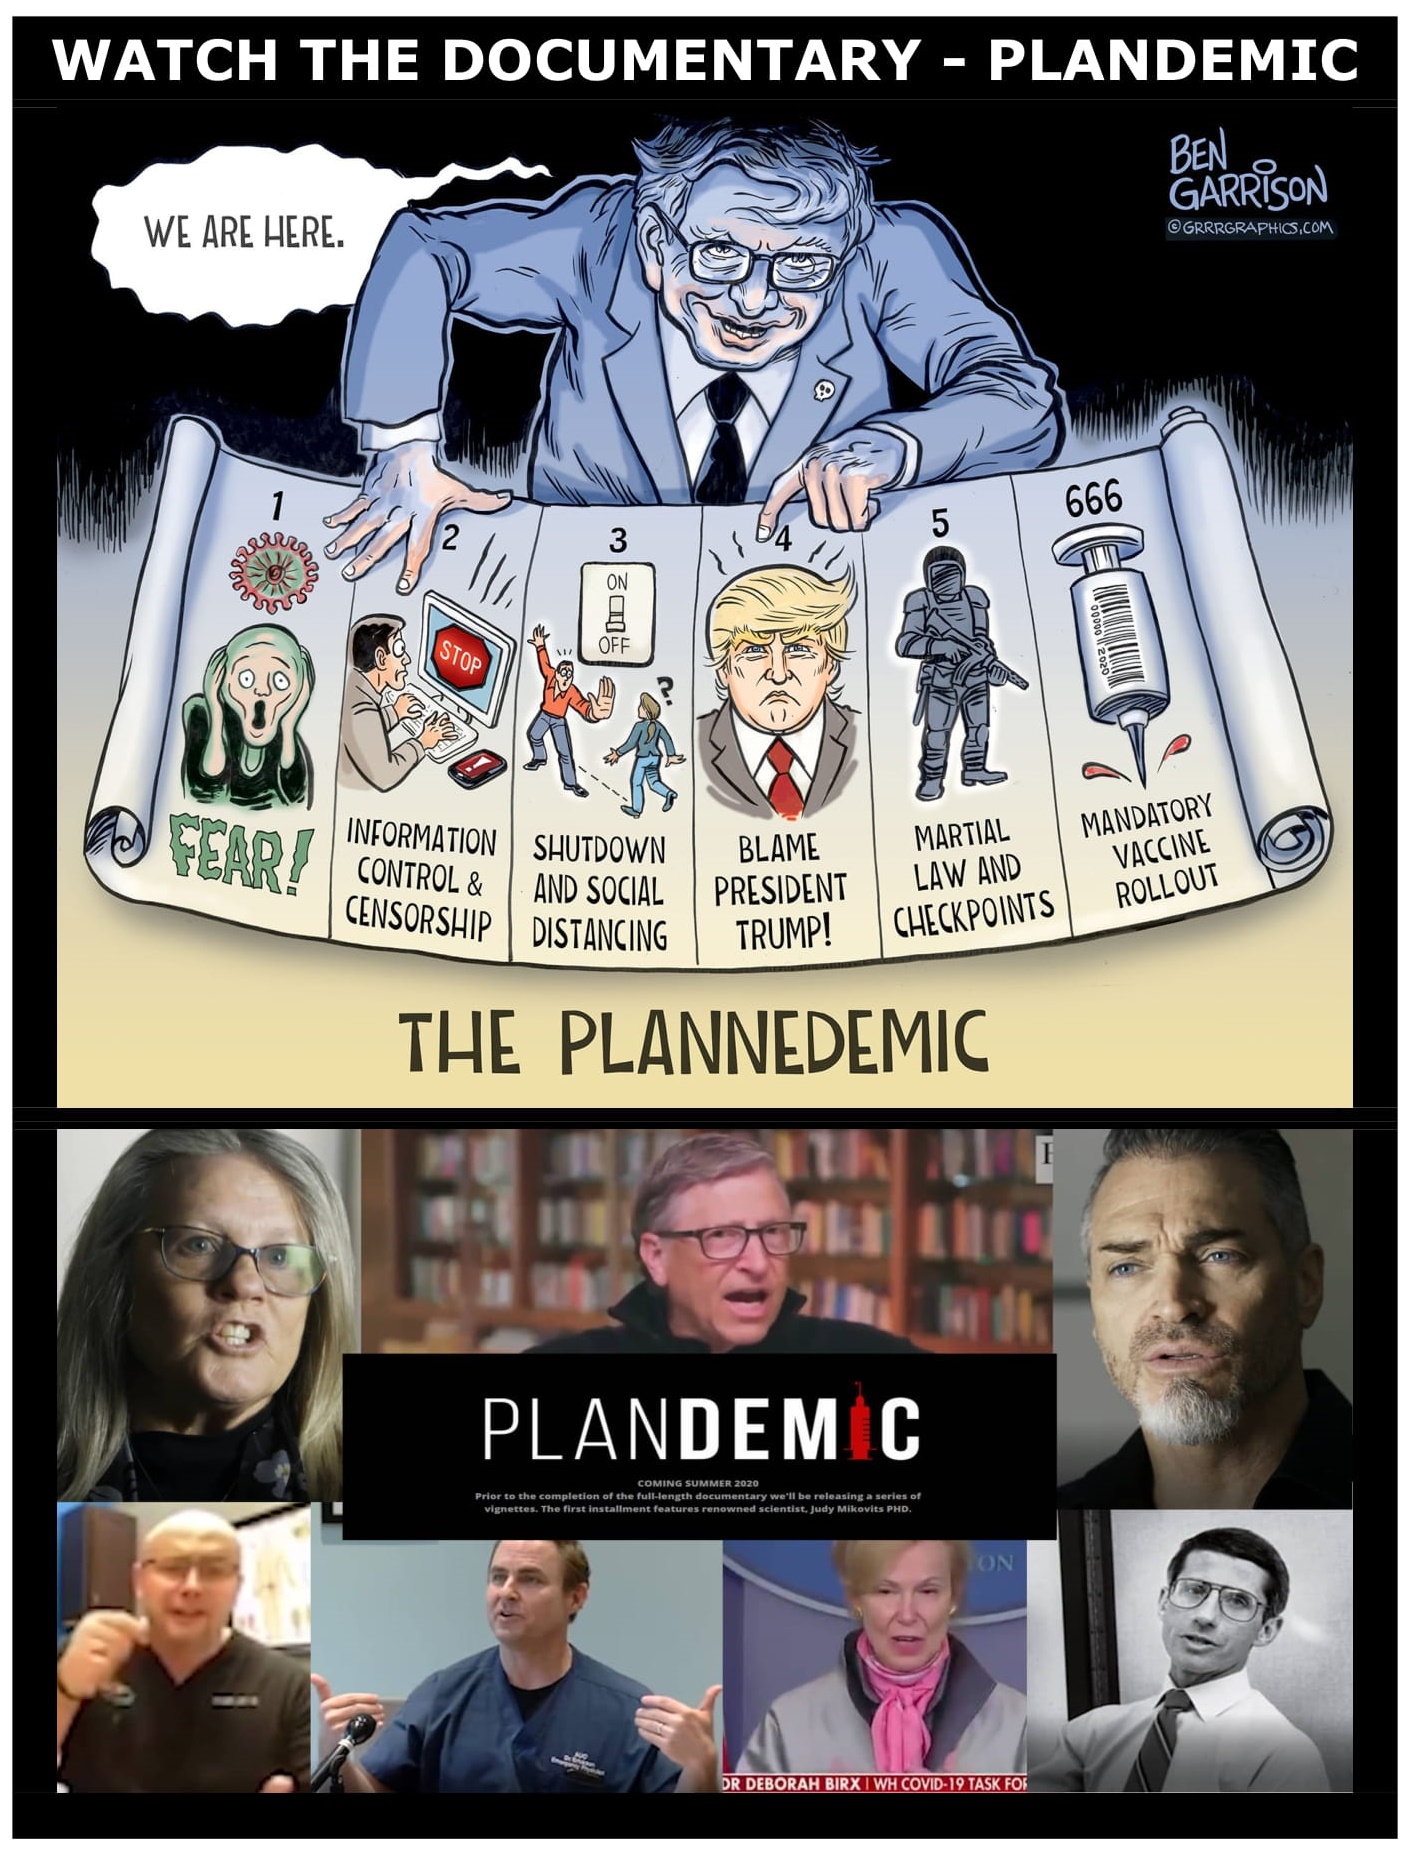 Watch the documentary - PLANDEMIC